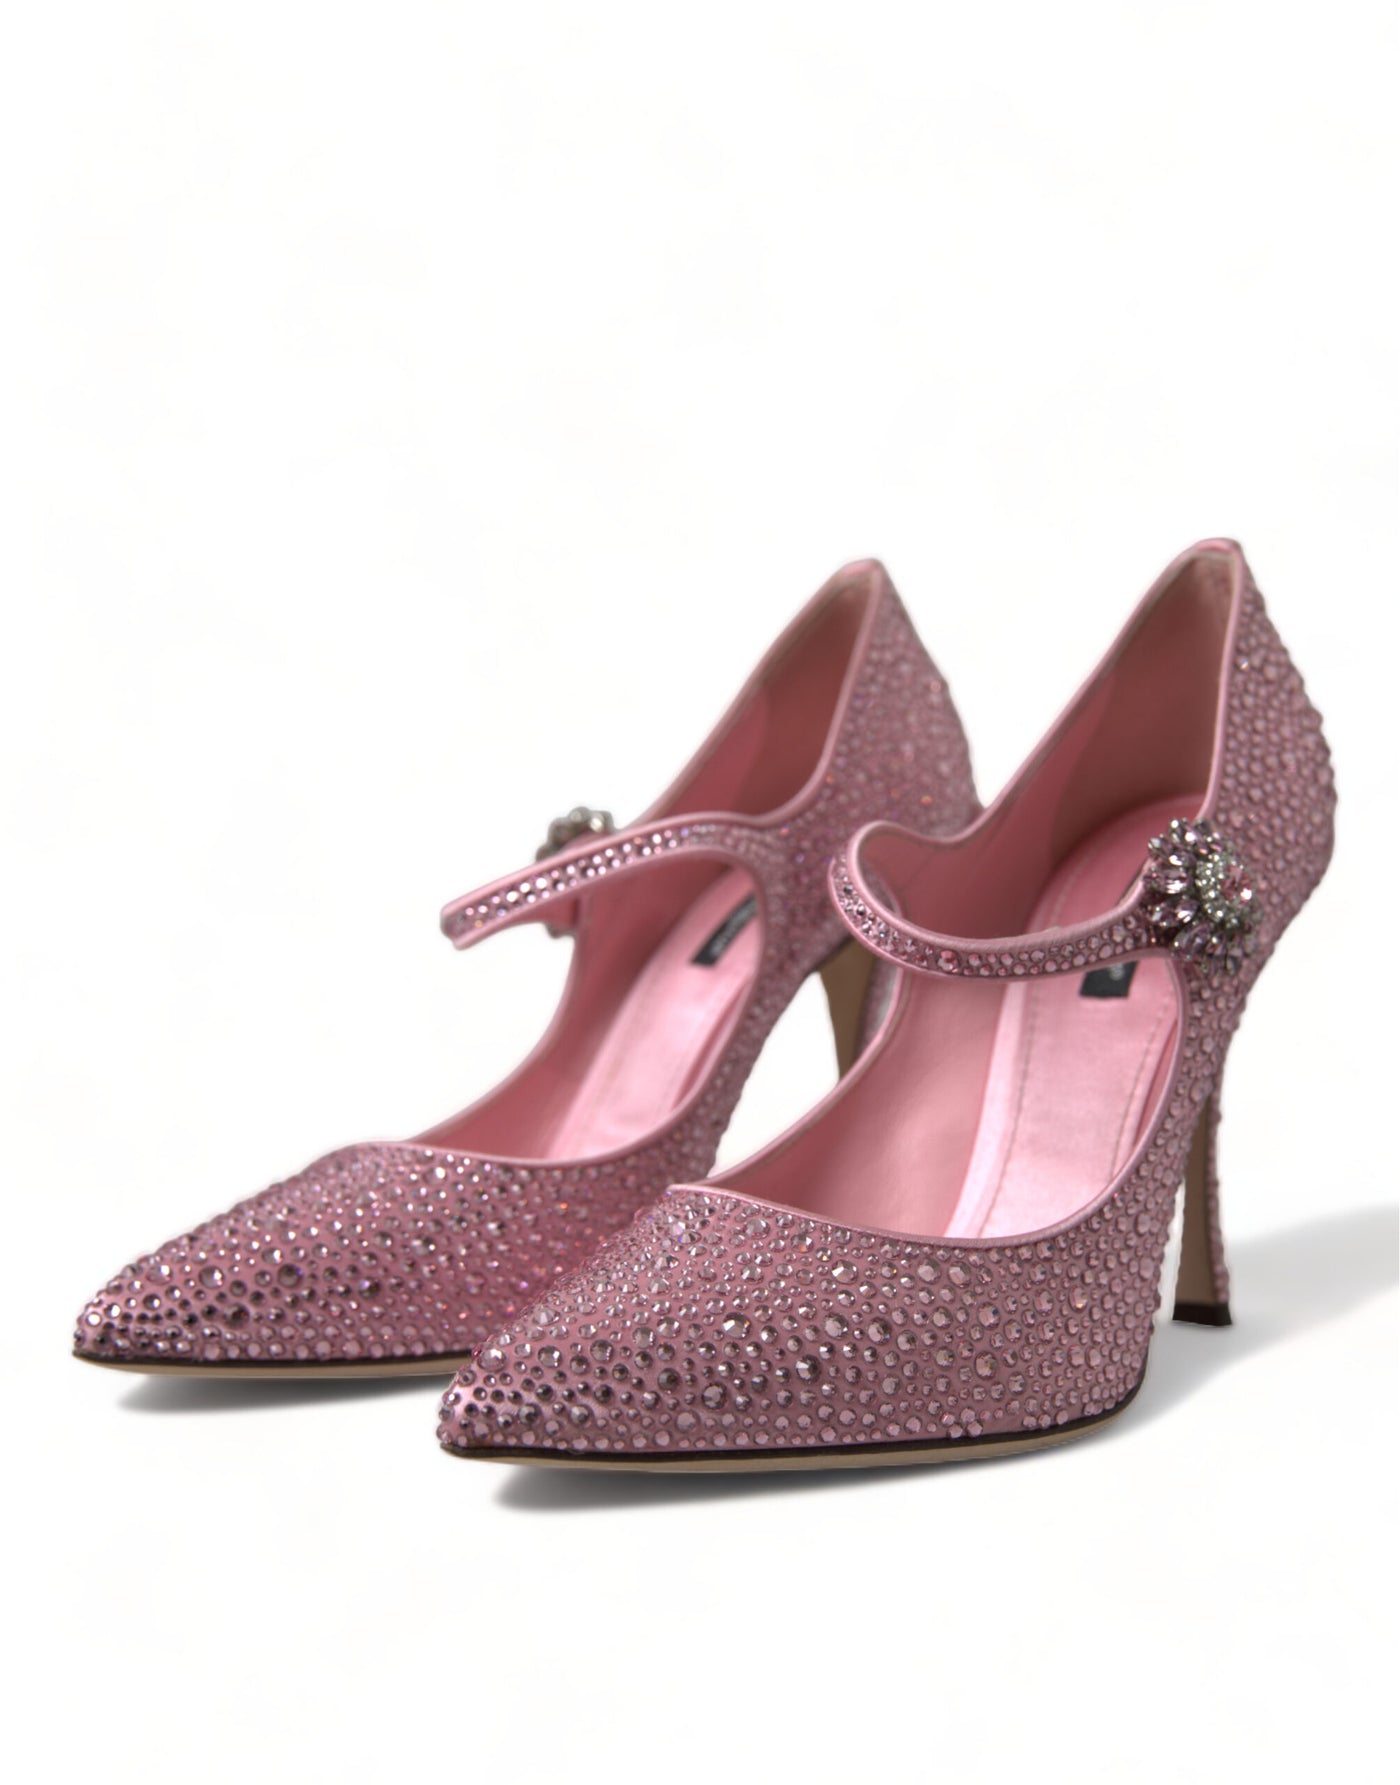 Pink Strass Crystal Heels Pumps Shoes